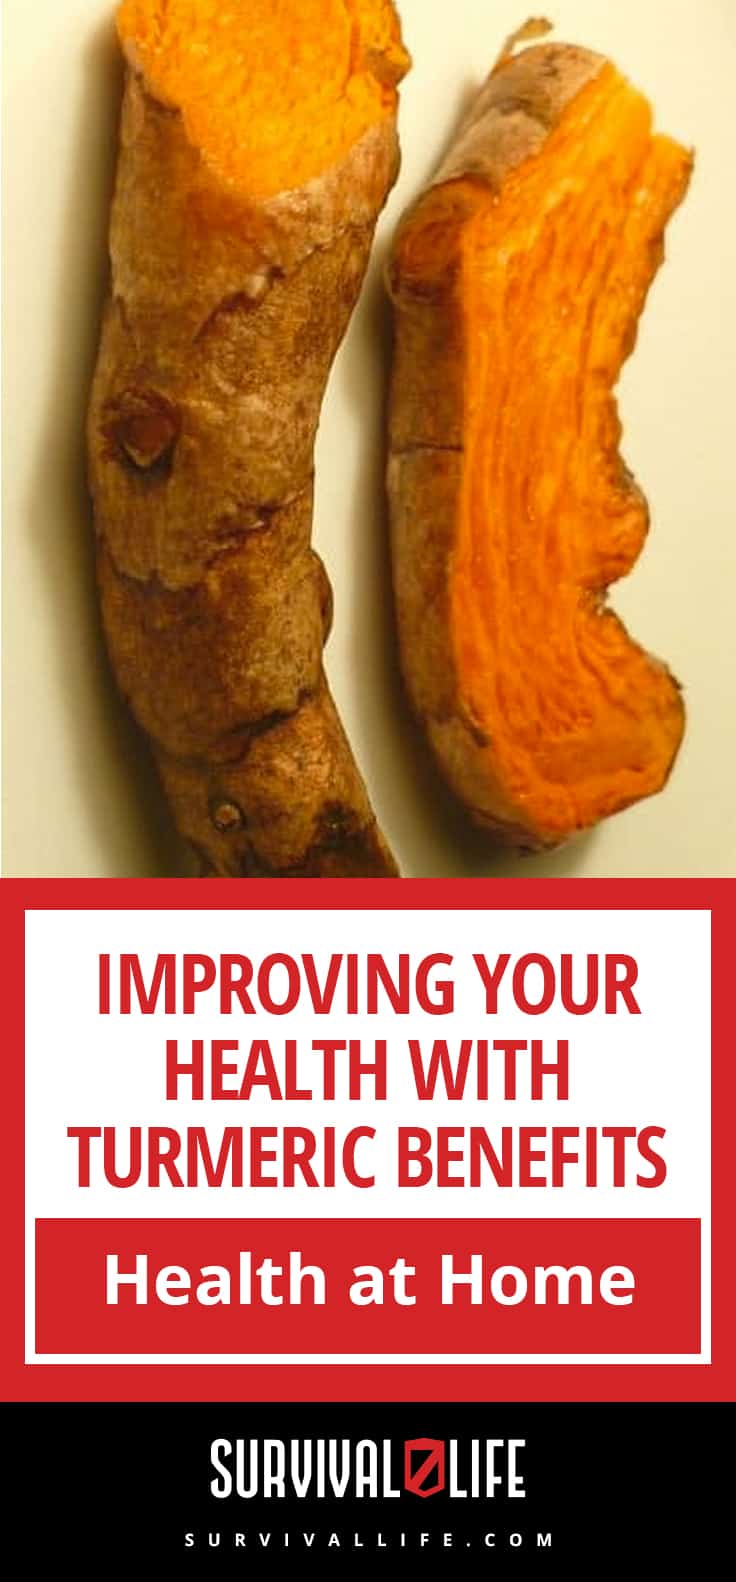 Turmeric Benefits: Improving Your Health And Natural Healing At Home | https://survivallife.com/improving-health-turmeric-benefits/